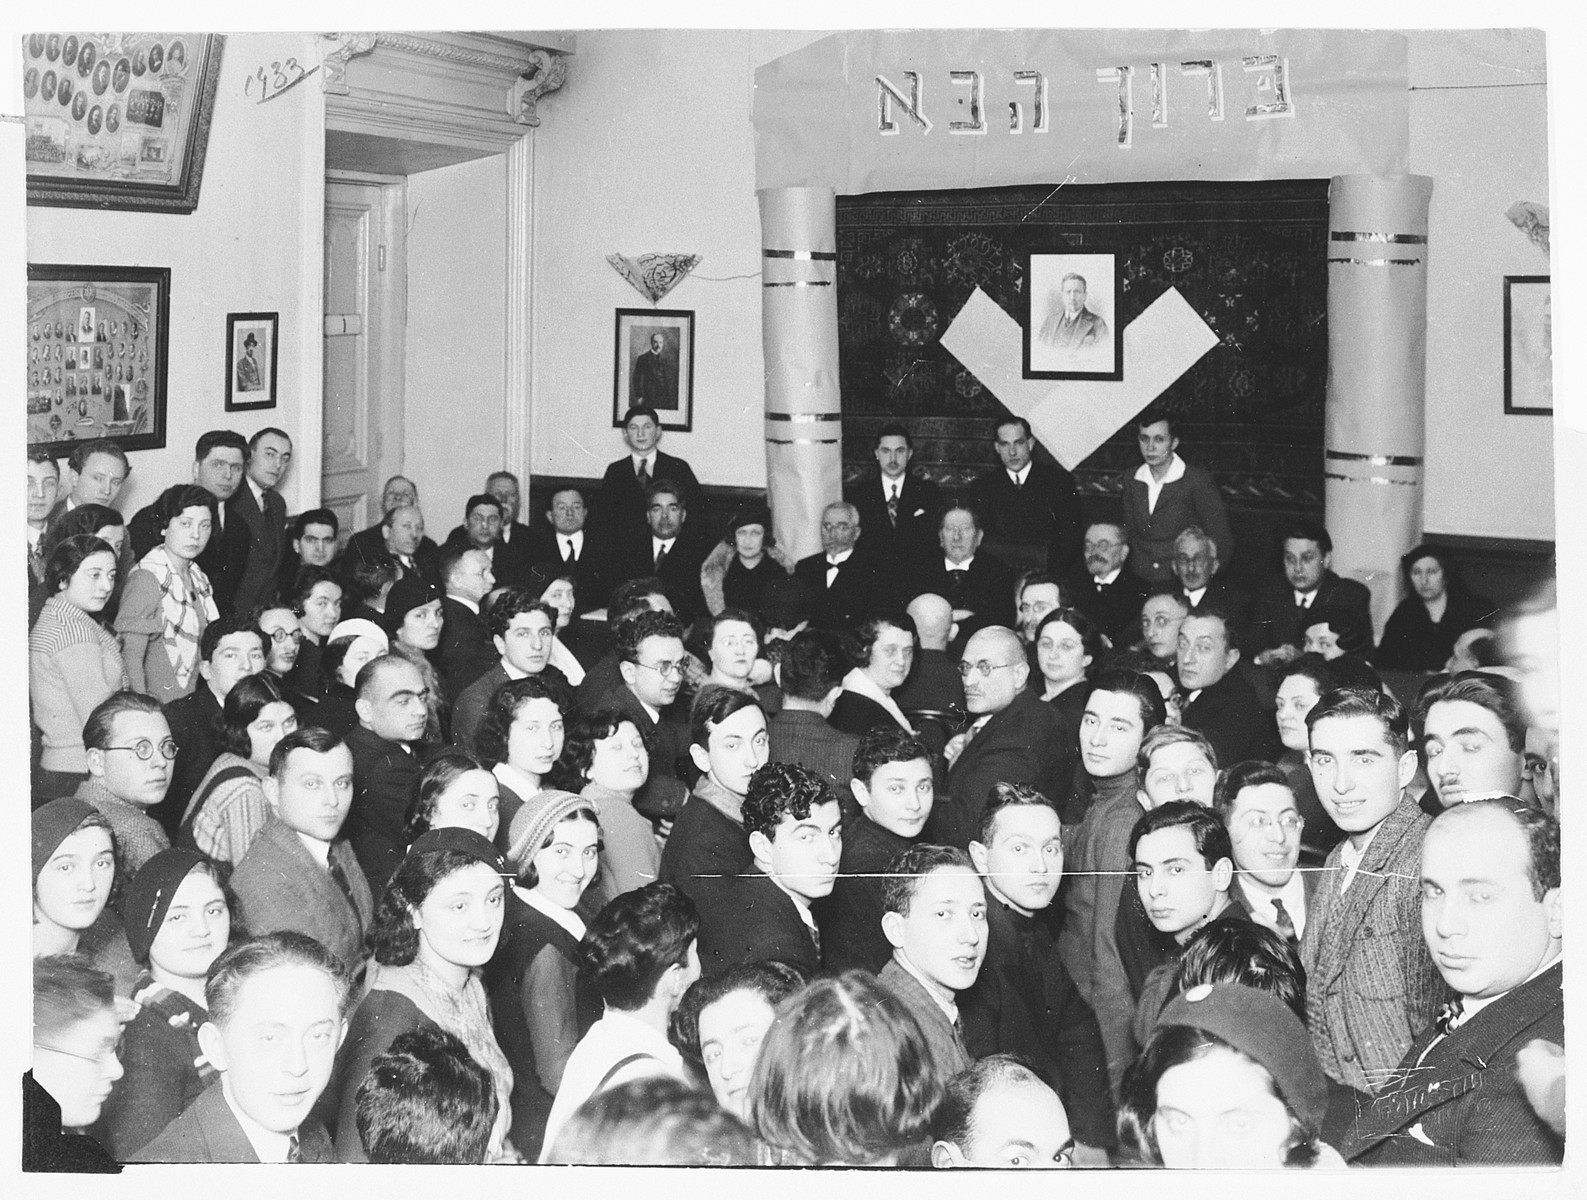 Jewish faculty and students of the Hebrew gymnasium in Vilna are gathered in the auditorium of the school during the visit of Zionist leader Nahum Sokolow.

Among those pictured is Ralph Denishevsky (beneath the Hebrew welcome sign, second from the right).